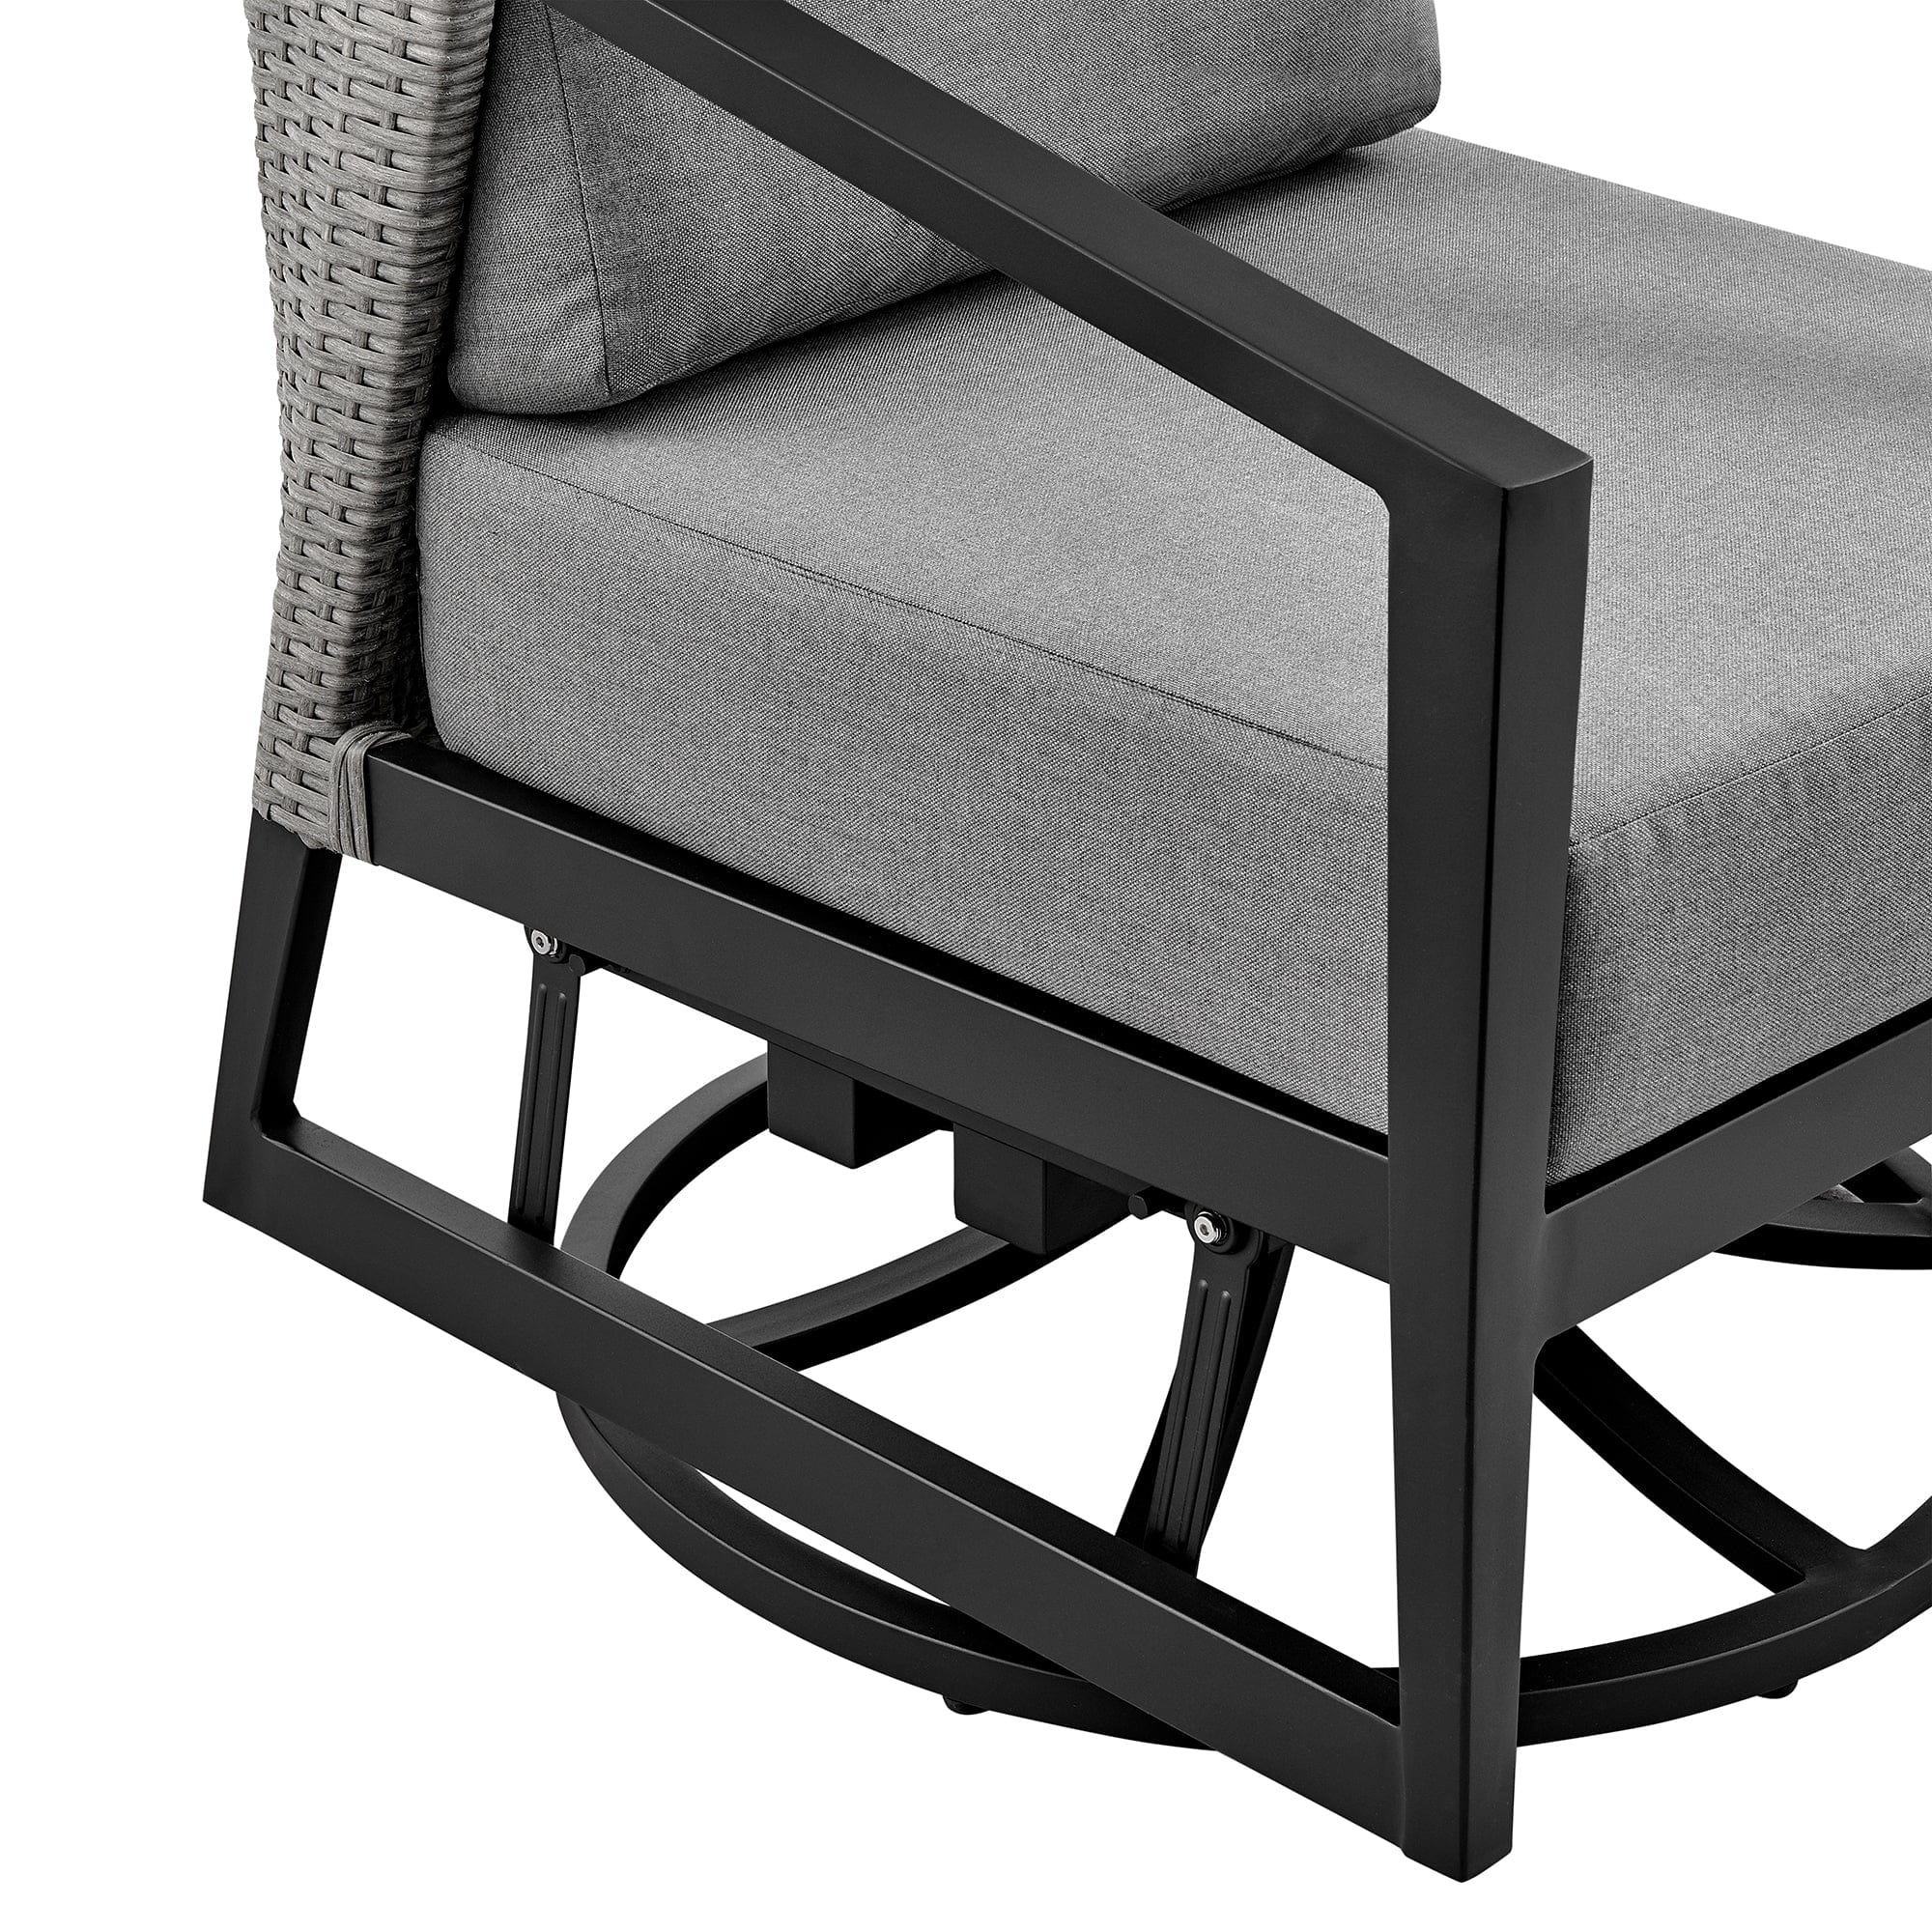 Armen Living Outdoor Swivel Chair Armen Living | Palma Outdoor Patio Swivel Lounge Chair in Aluminum with Grey Cushions | LCPFSWCHGR